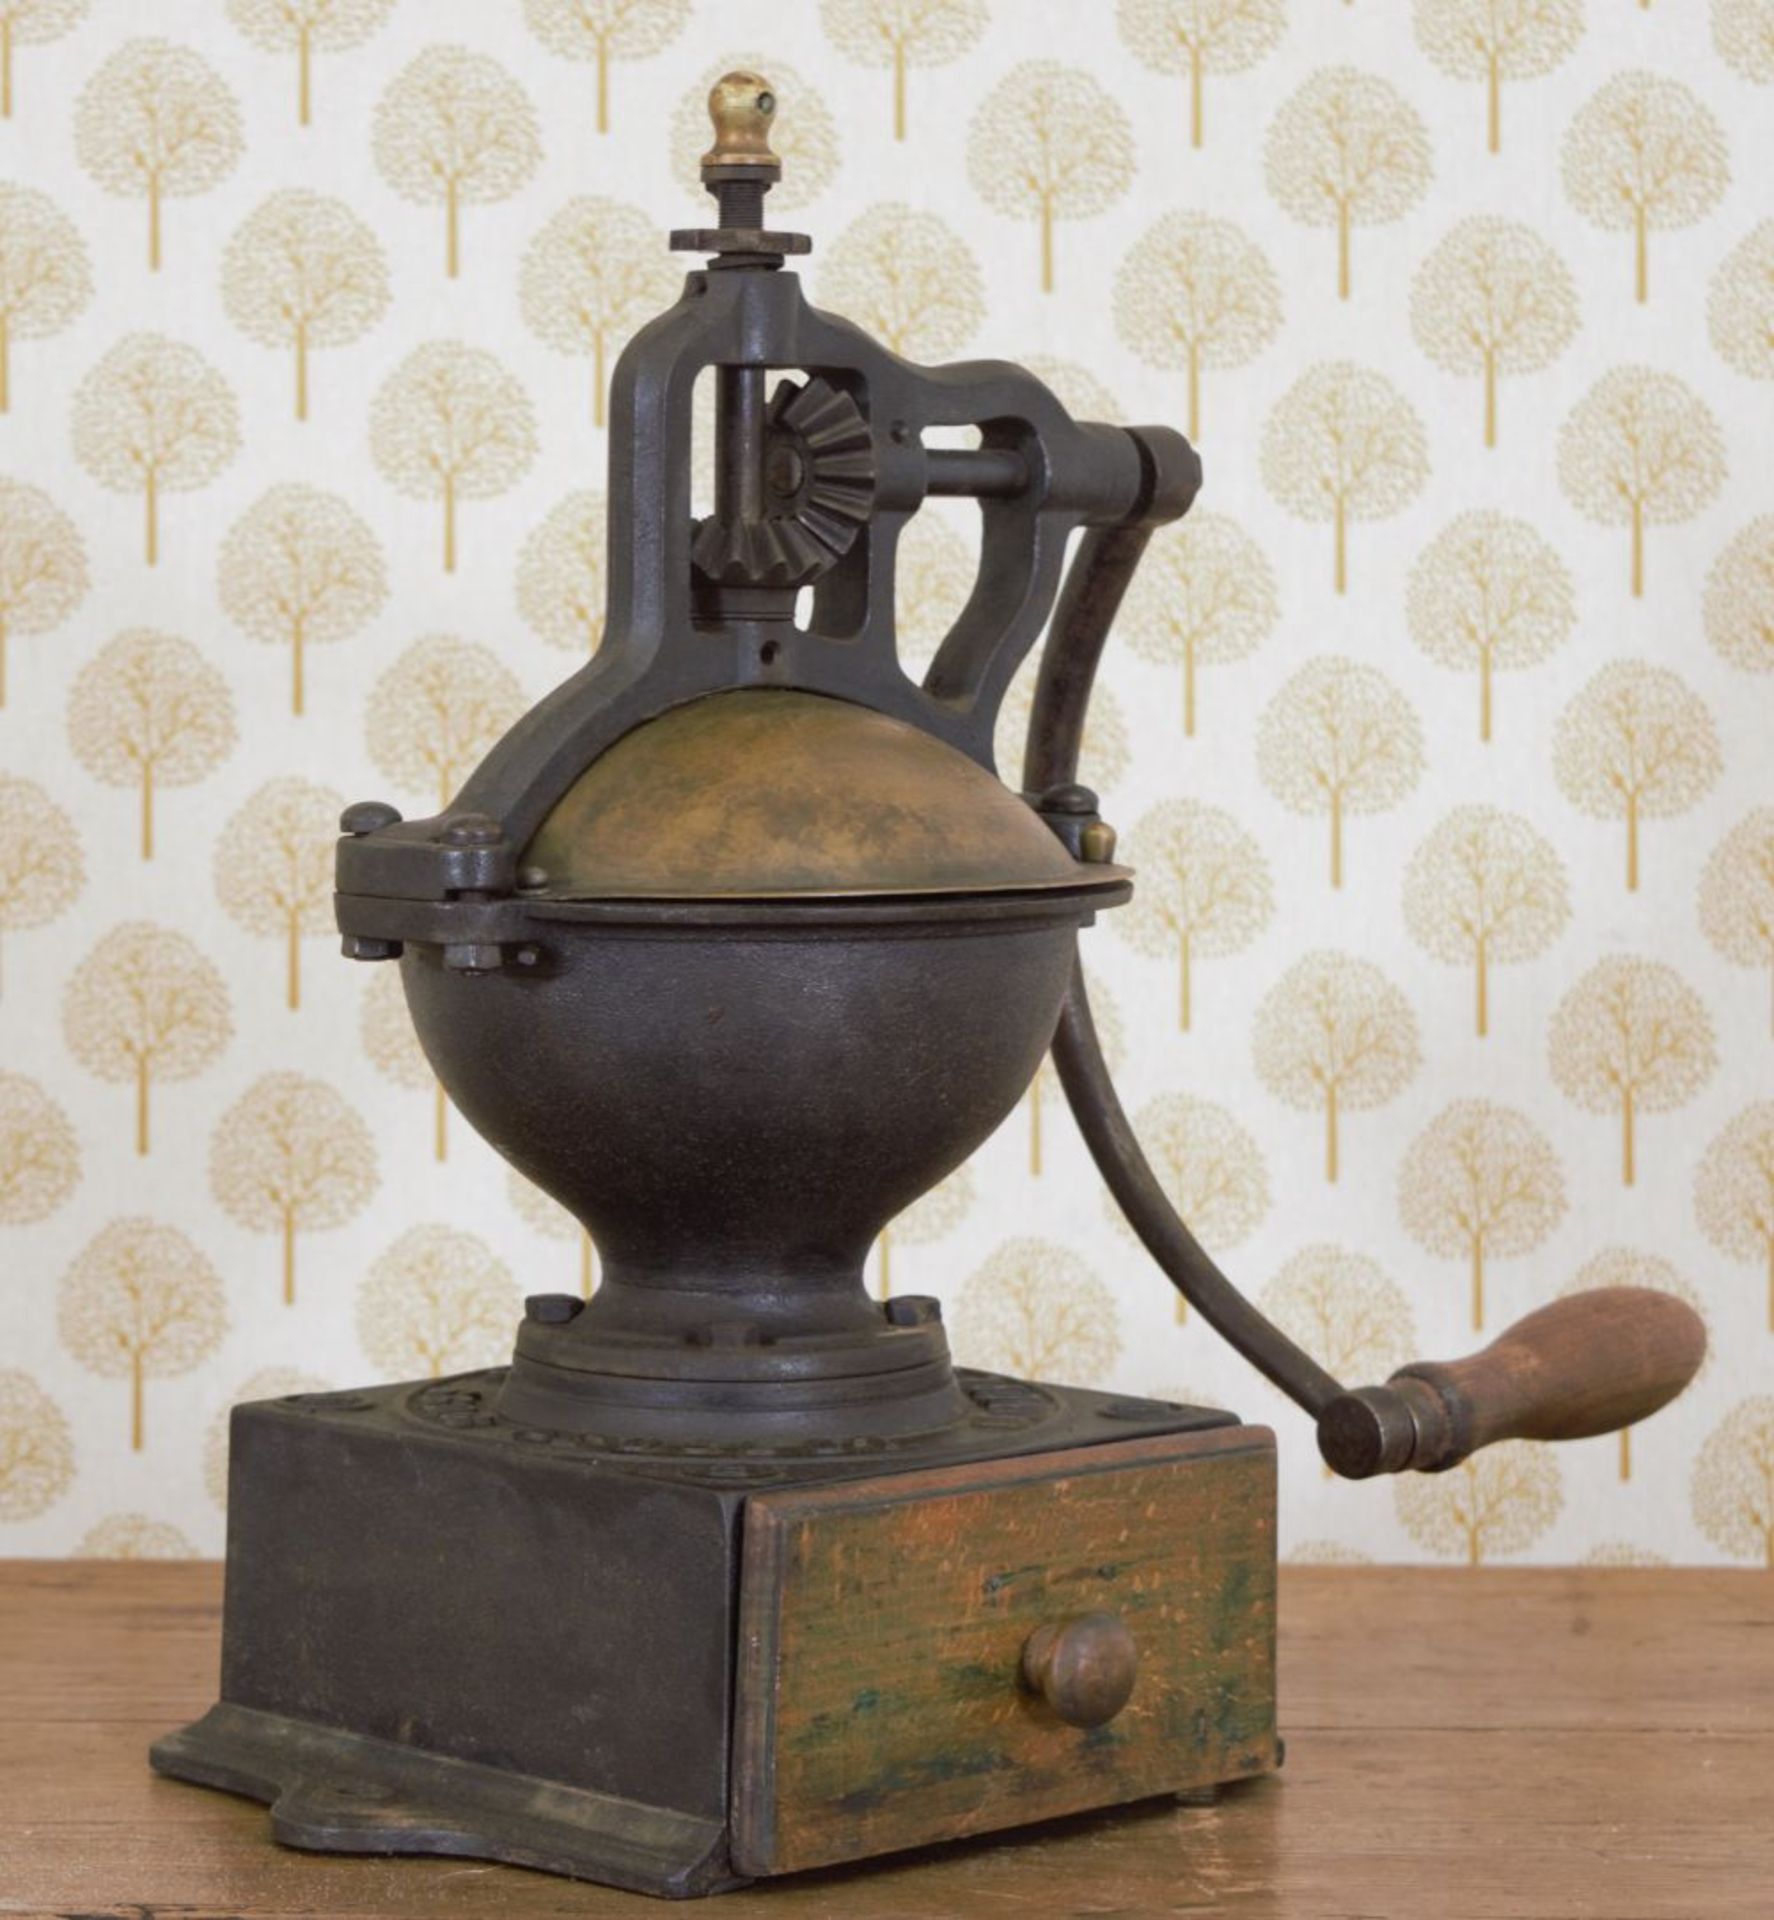 19TH-CENTURY BRASS & IRON TABLE TOP COFFEE GRINDER - Image 2 of 3